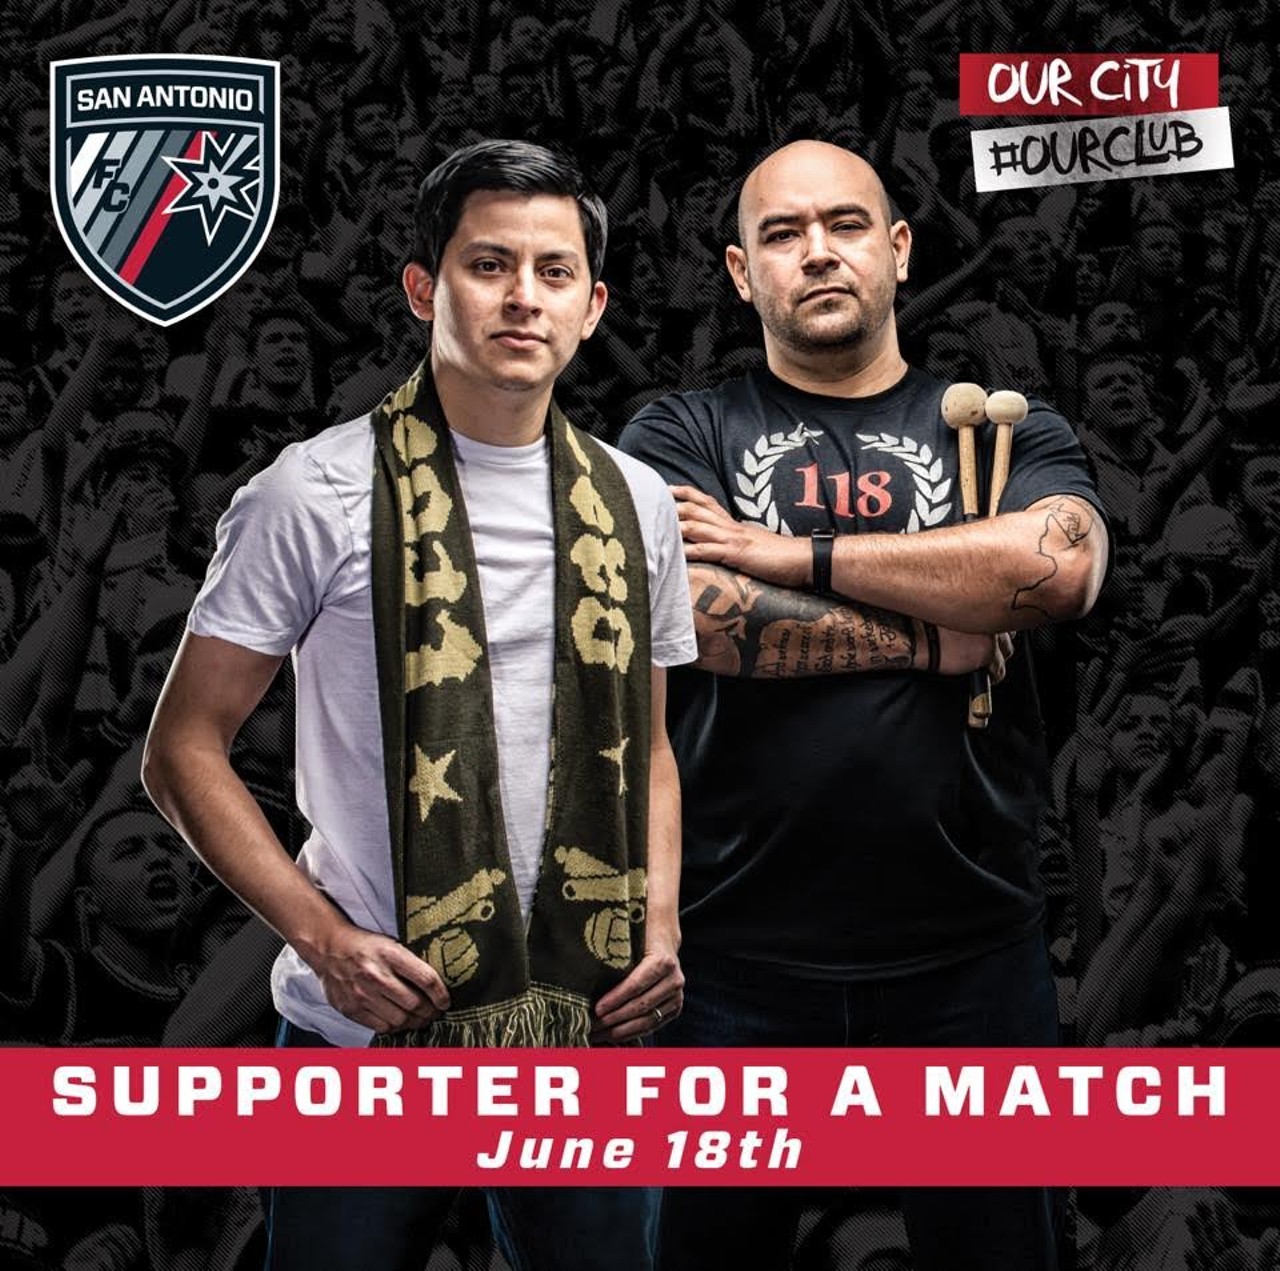 San Antonio FC &#149; Toyota Field 5106 David Edwards Dr.
Return the tie.  This year bring your dad to a San Antonio FC match.  Tickets still available for this Saturday, June 18th vs Colorado Springs Switchbacks FC.
http://www.sanantoniofc.com/